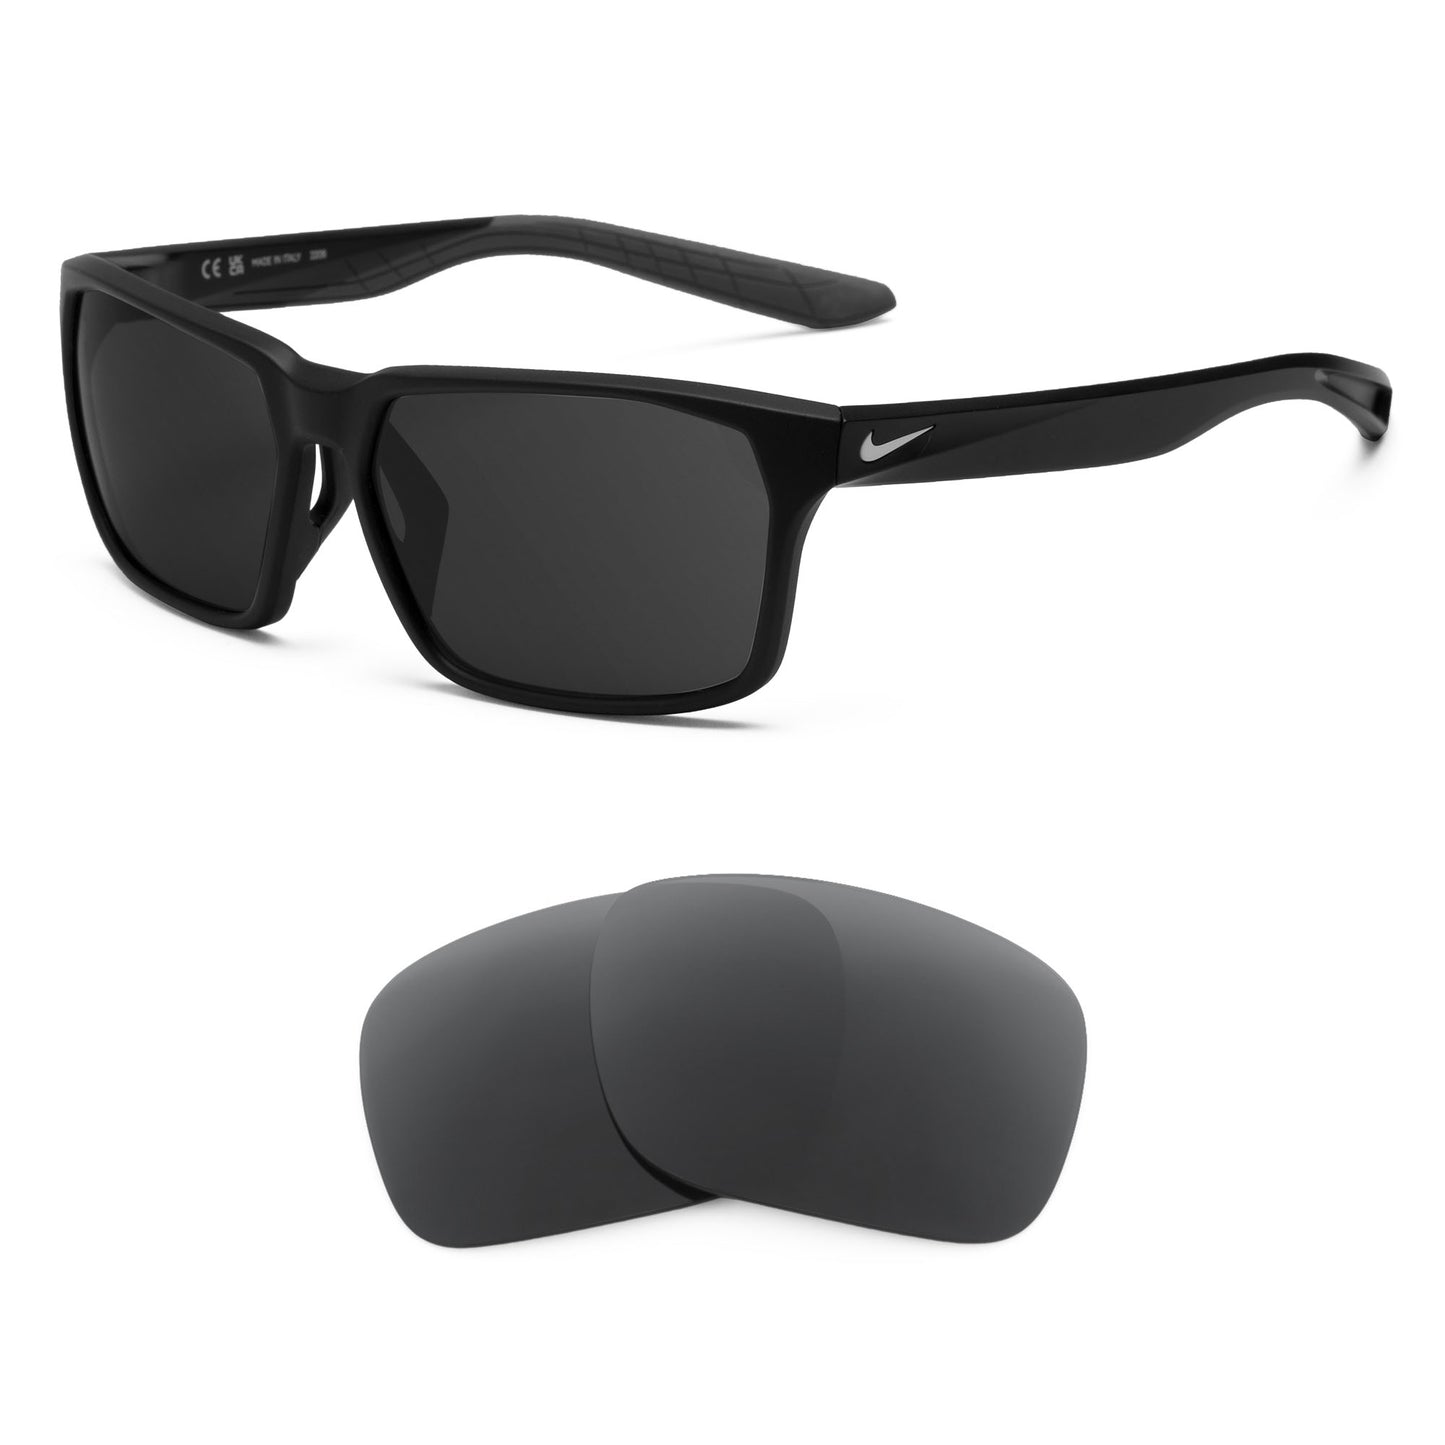 Nike Maverick RGE sunglasses with replacement lenses